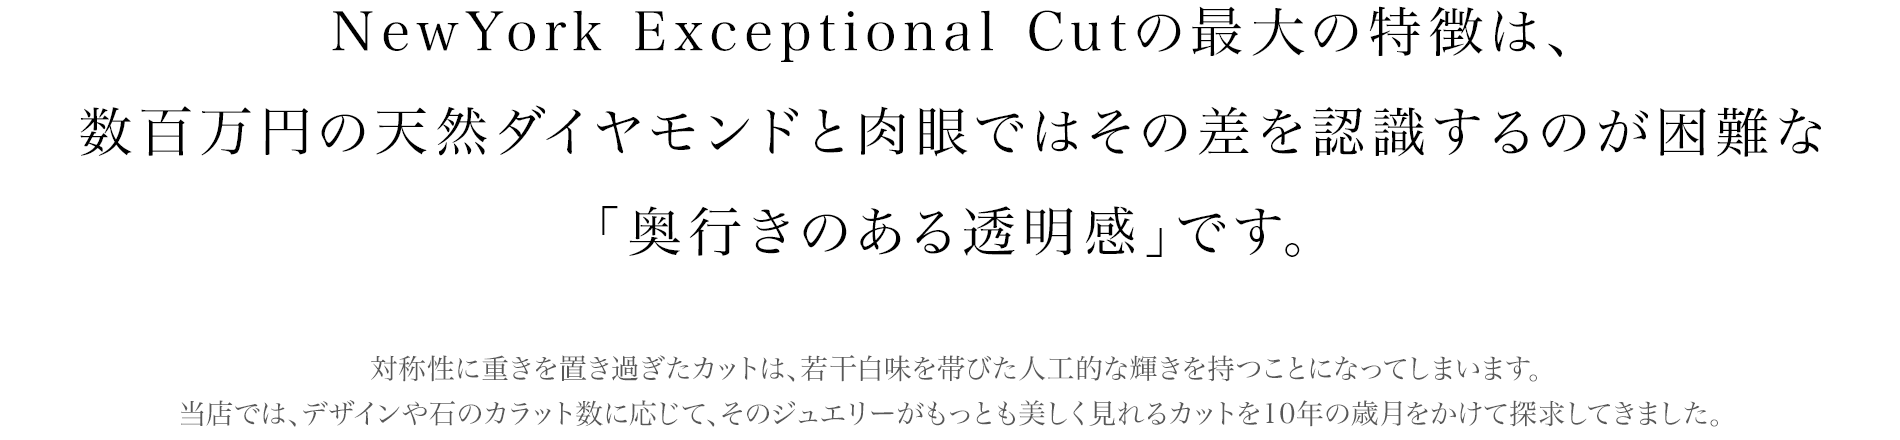 New York Exceptional Cut　ニューヨーク エクセプショナル カット